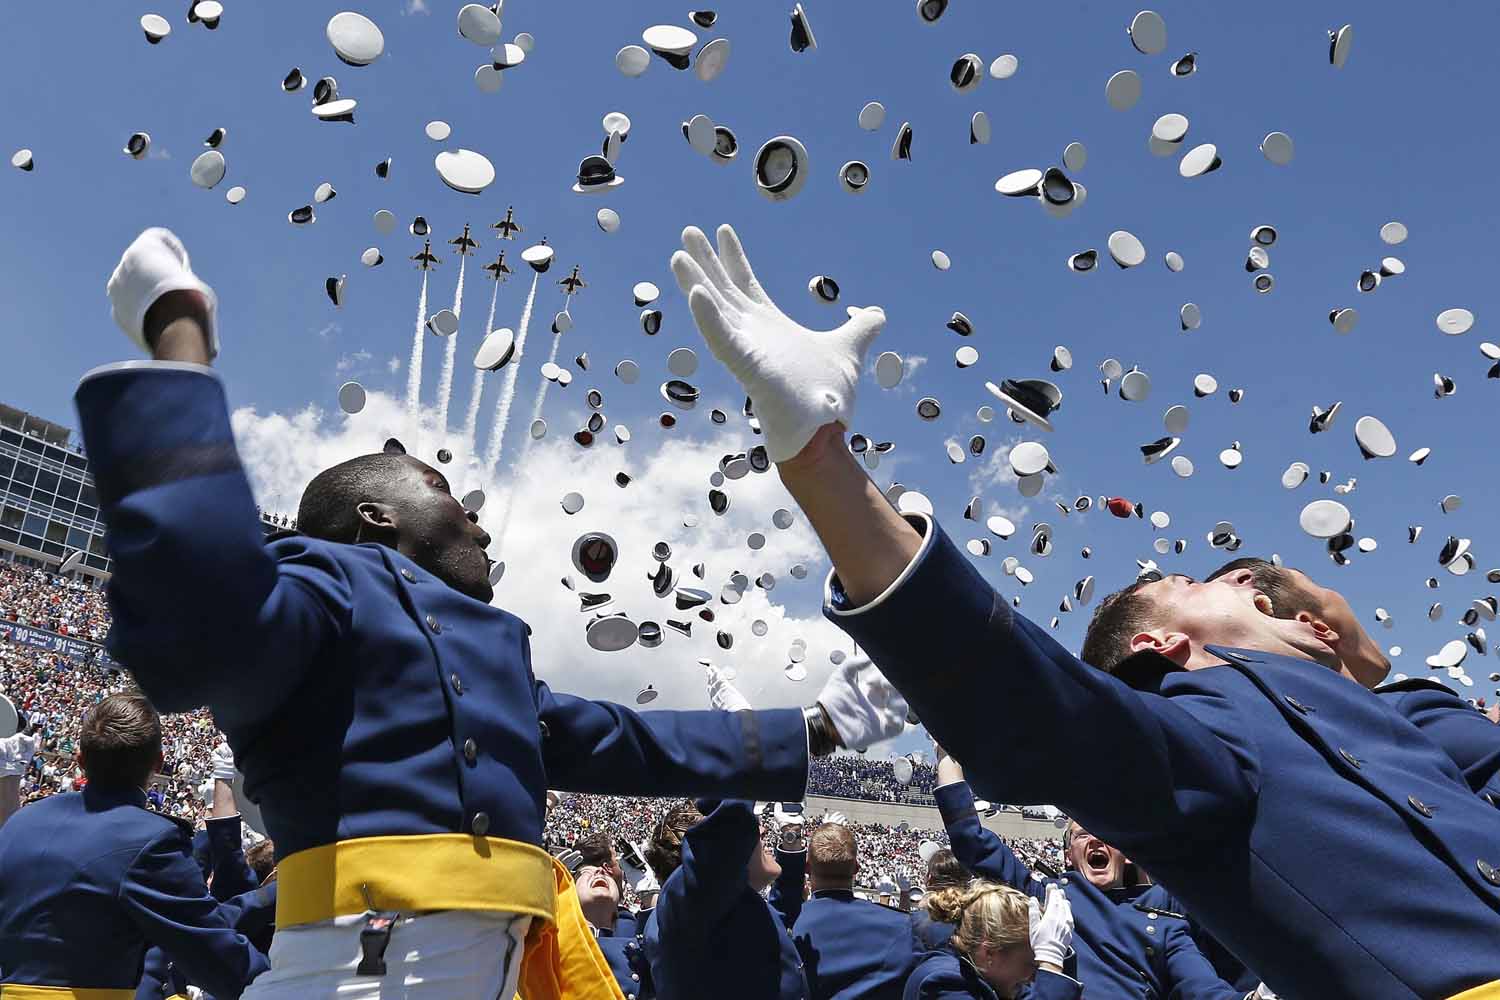 May 28, 2014. Air Force Academy graduates throw their caps into the air as F-16 jets from the Thunderbirds make a flyover, at the completion of the graduation ceremony for the class of 2014, at the U.S. Air Force Academy, in Colorado.